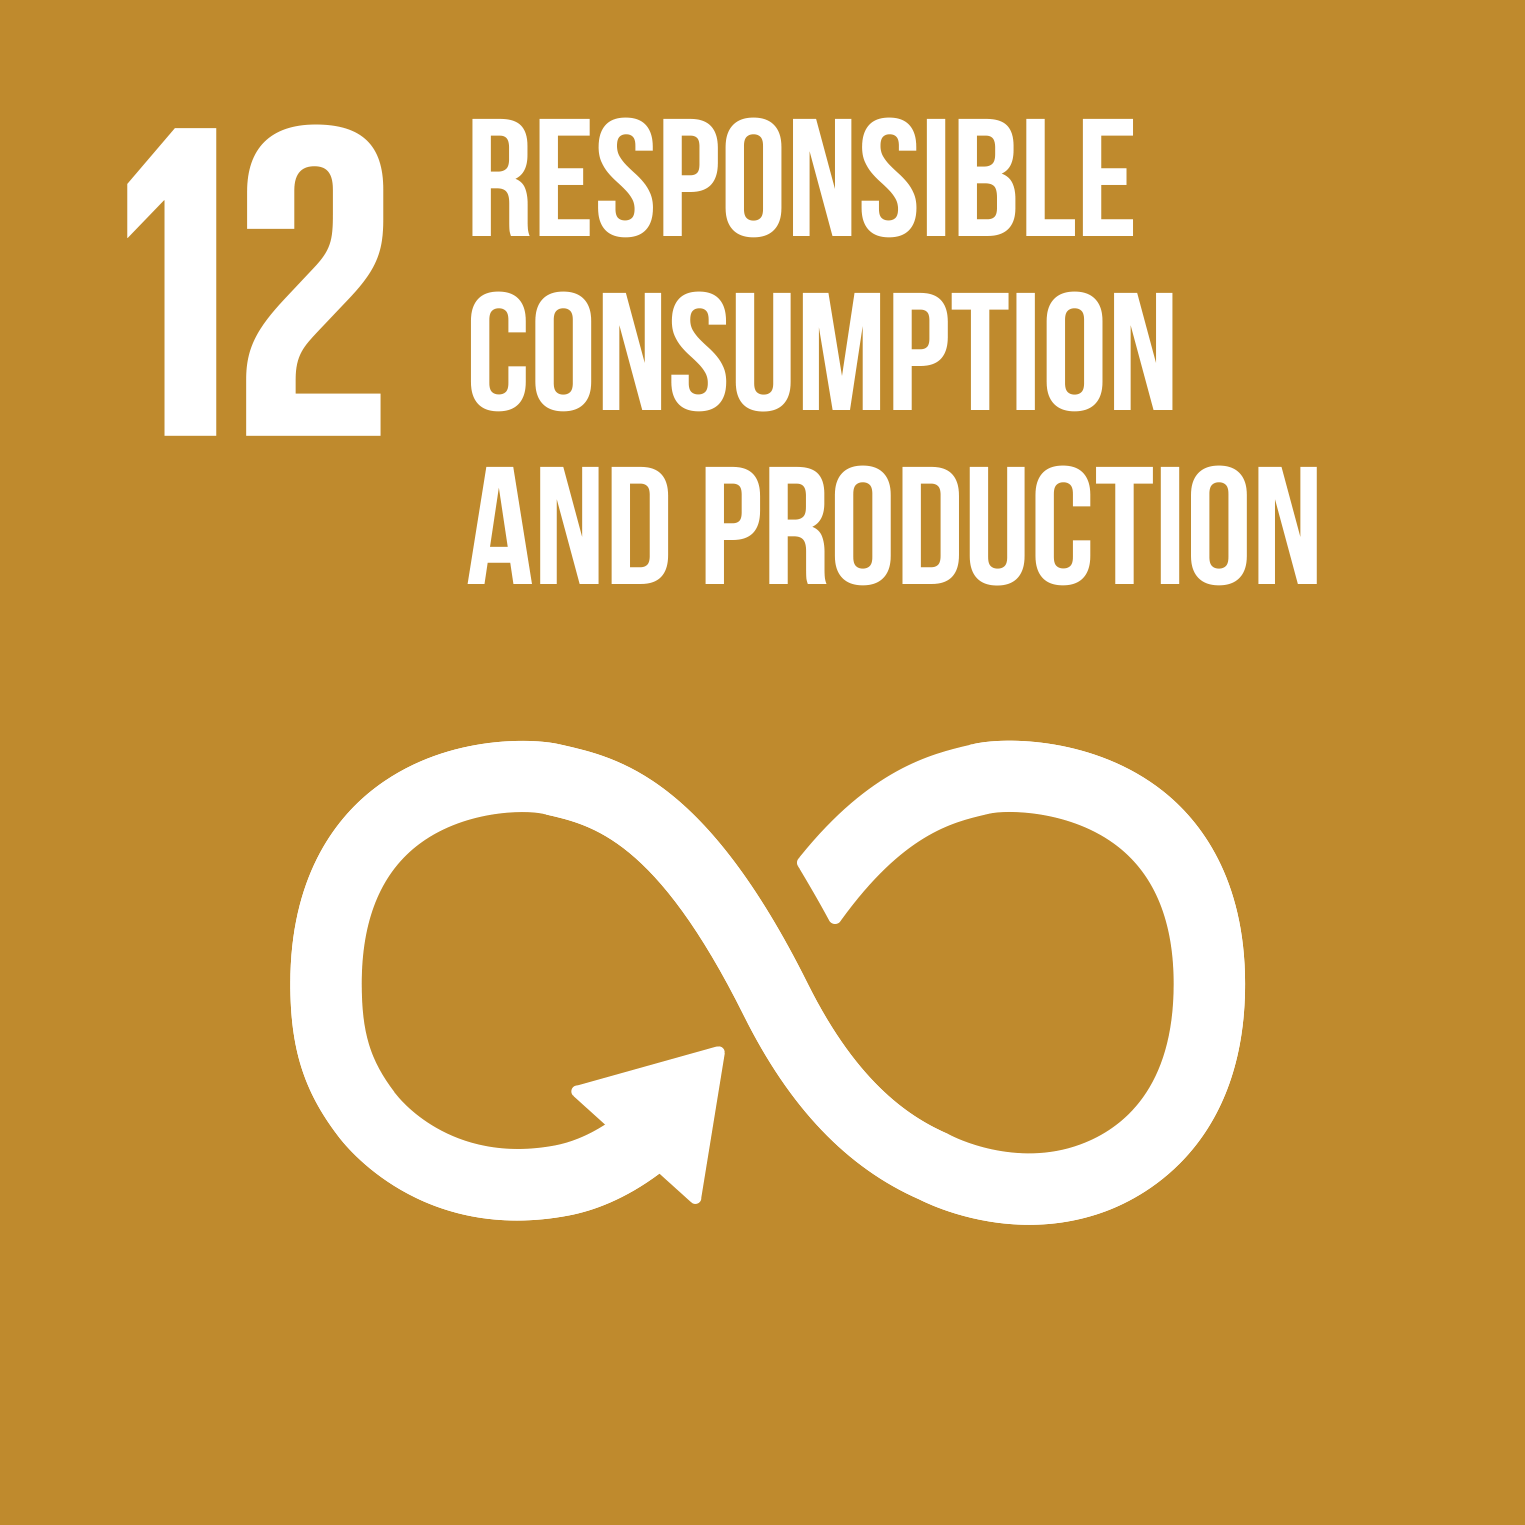 United Nations Sustainable Development Goal 12: Ensure sustainable consumption and production patterns